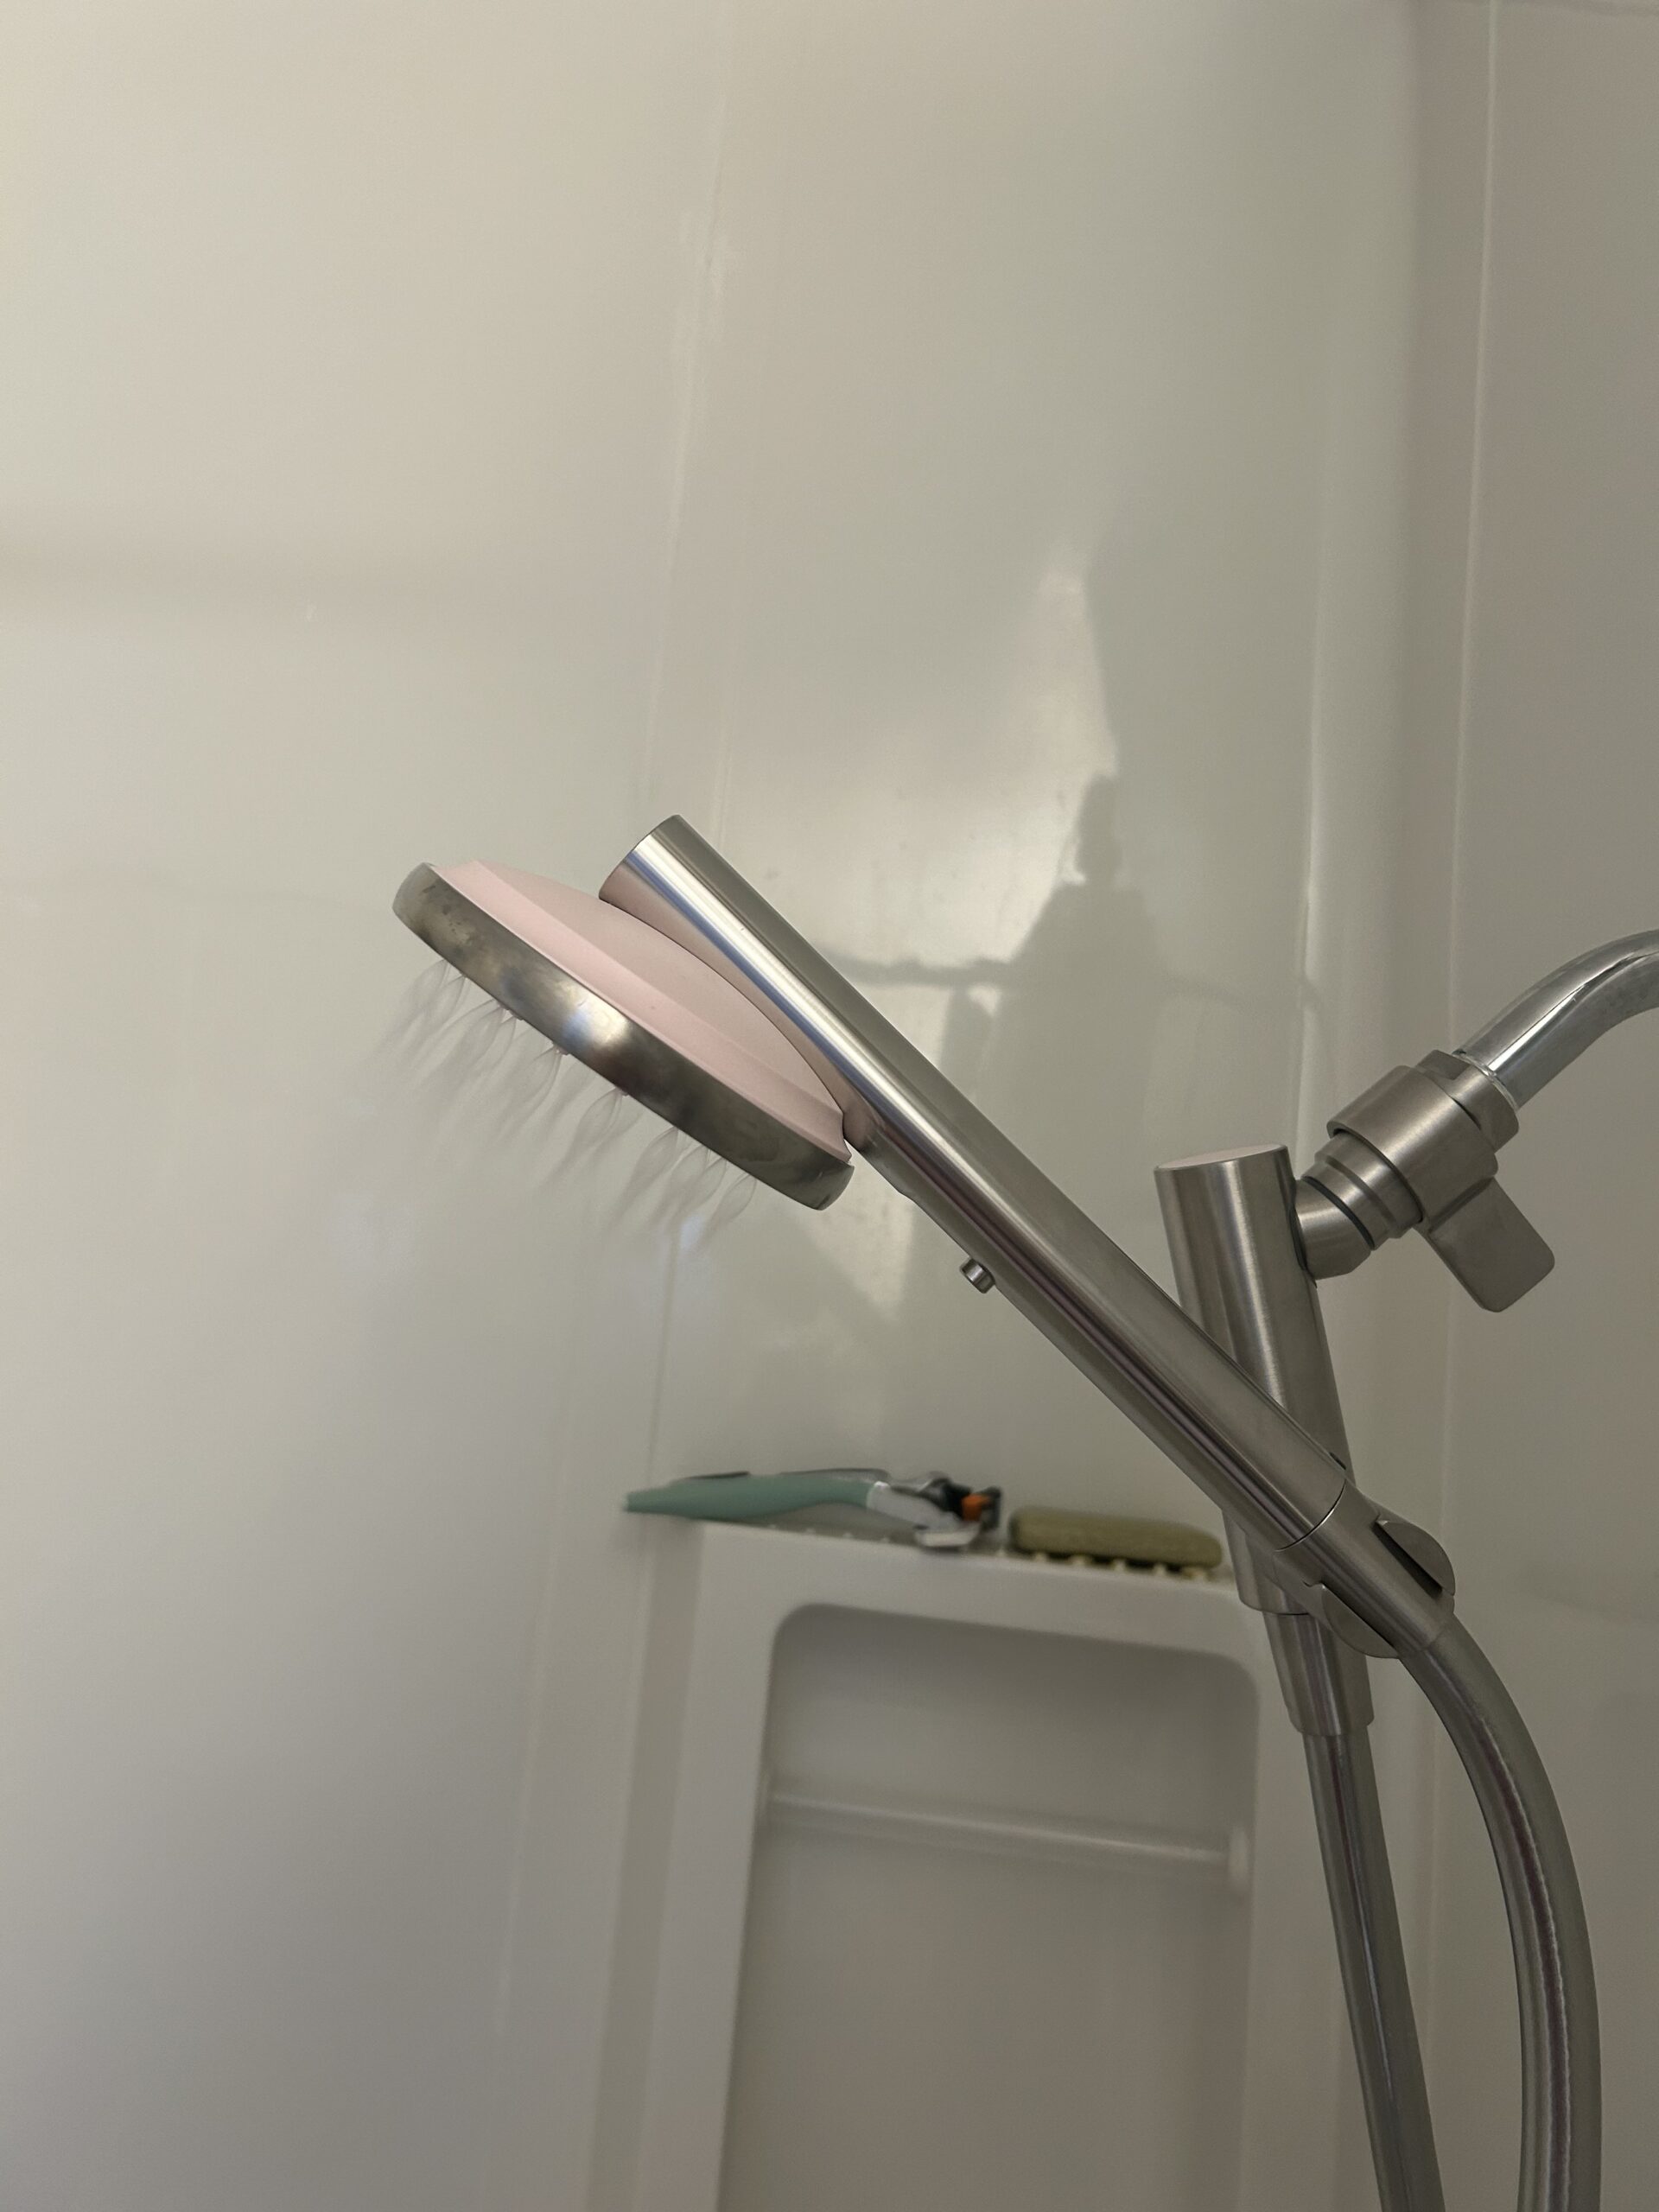 A shower head with a shower head attached to it.